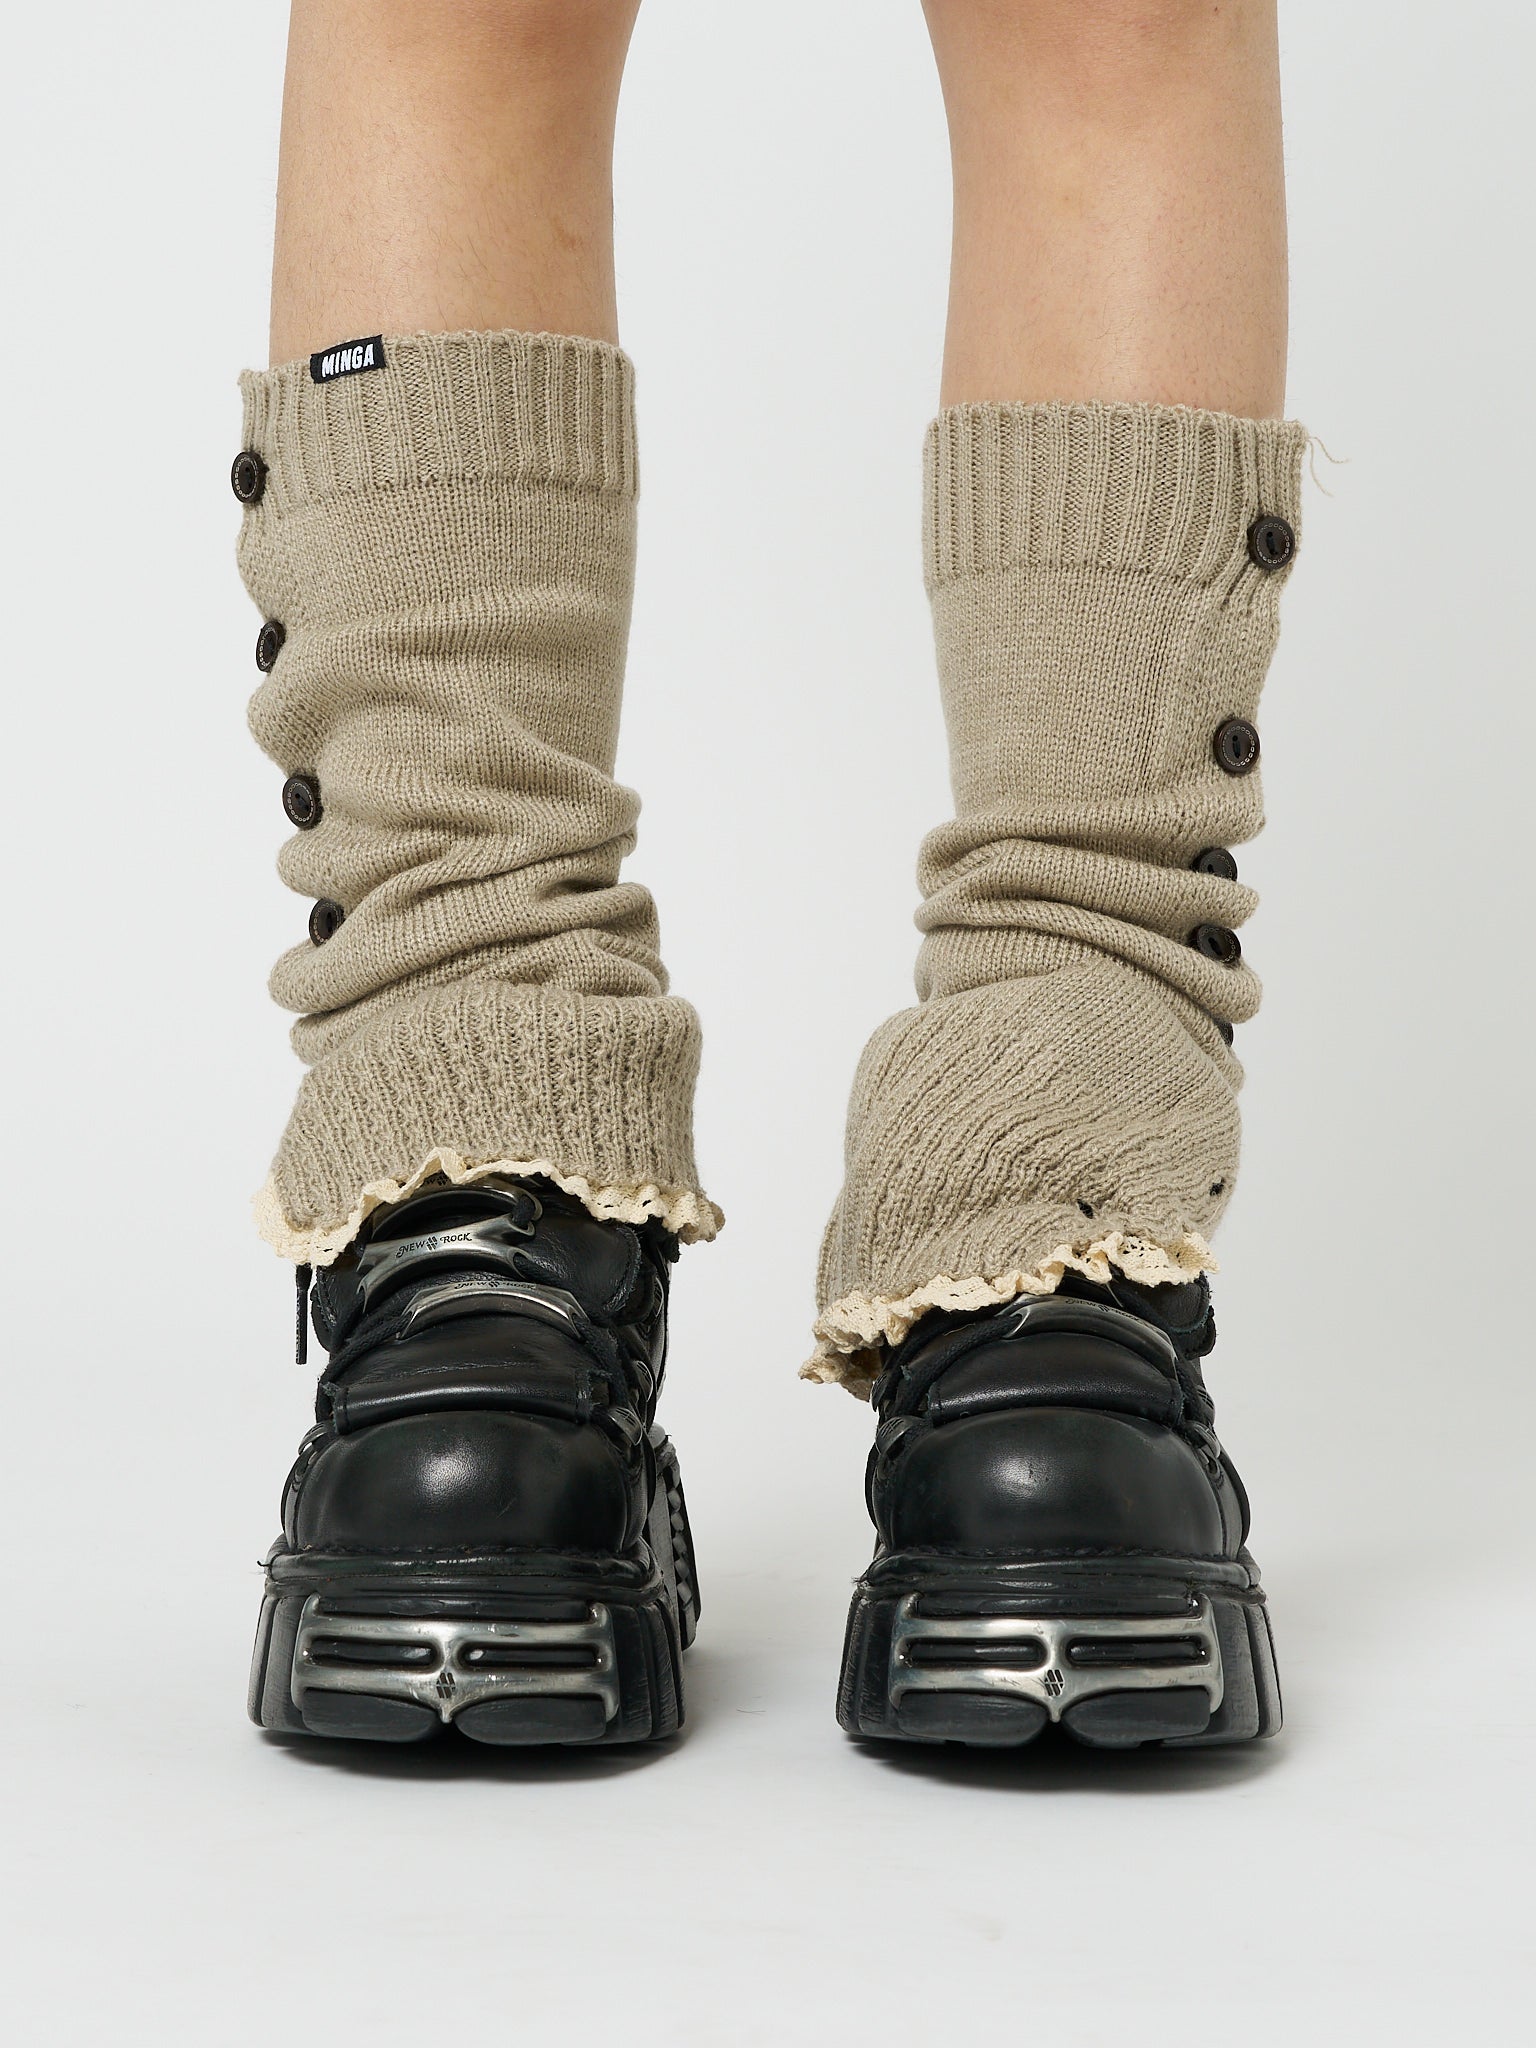 Beige leg warmers named Zeva by Minga London, featuring button details for a stylish and cozy addition to your wardrobe.